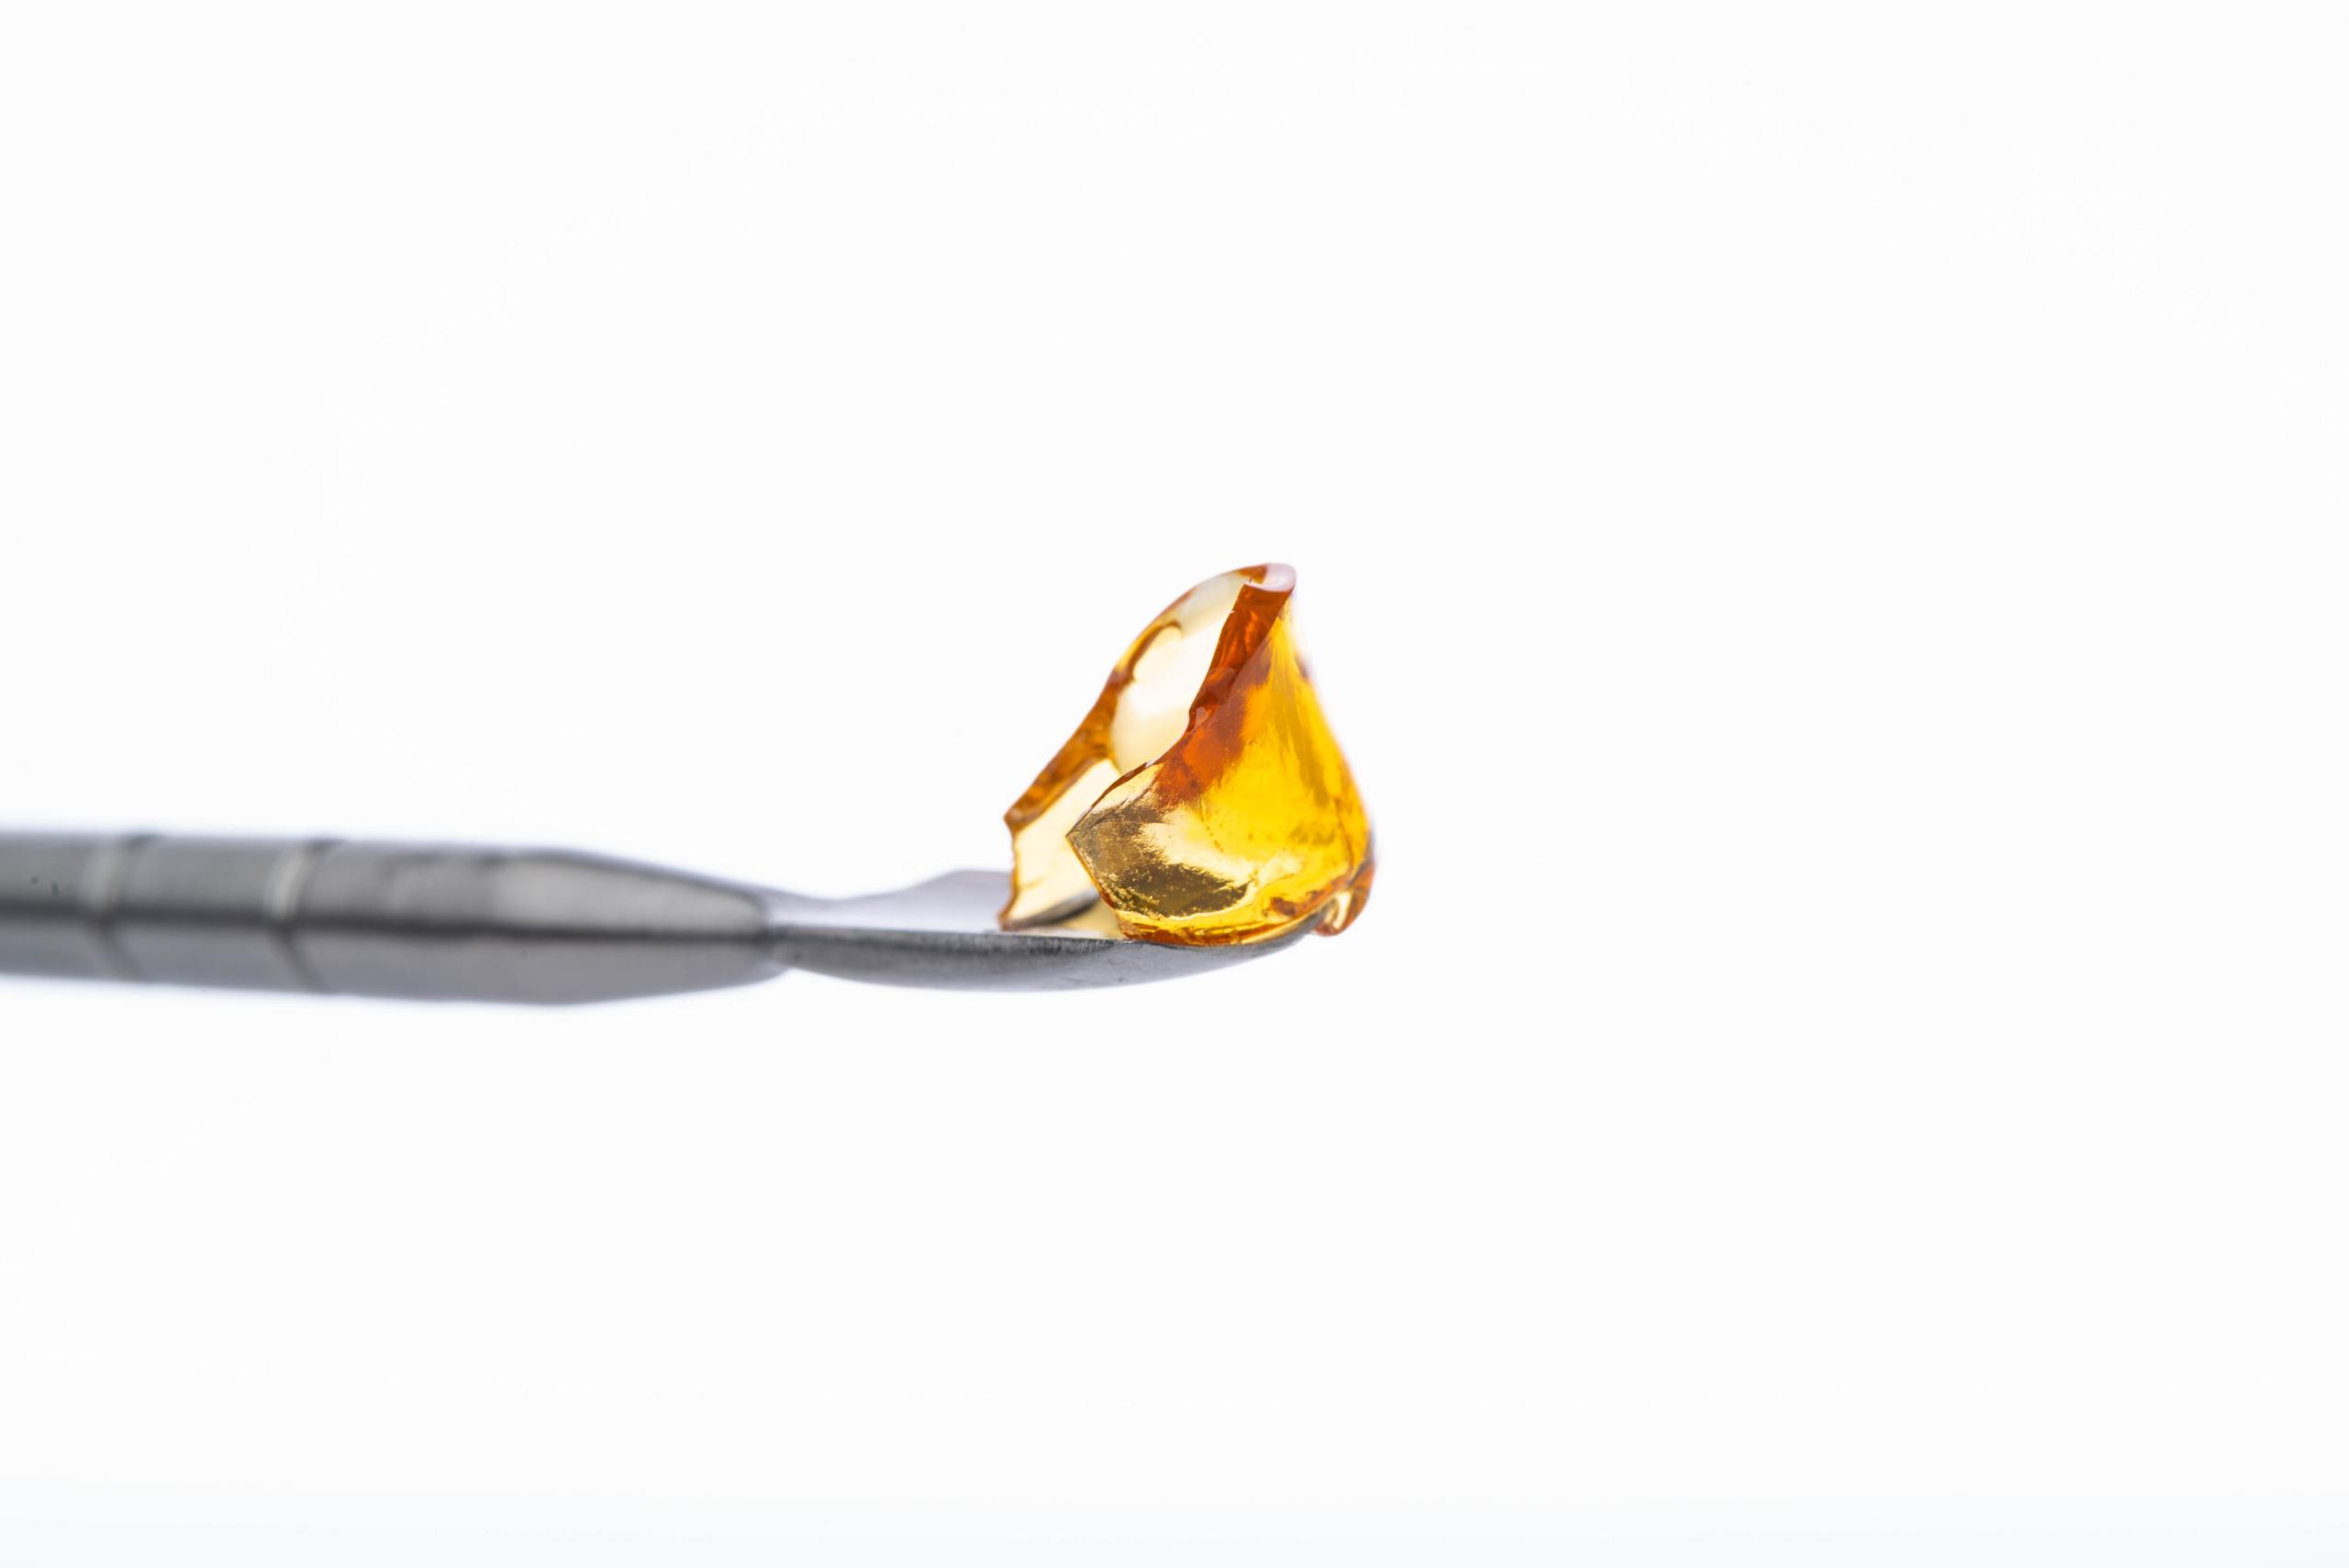 Solvent-free Cannabis Shatter